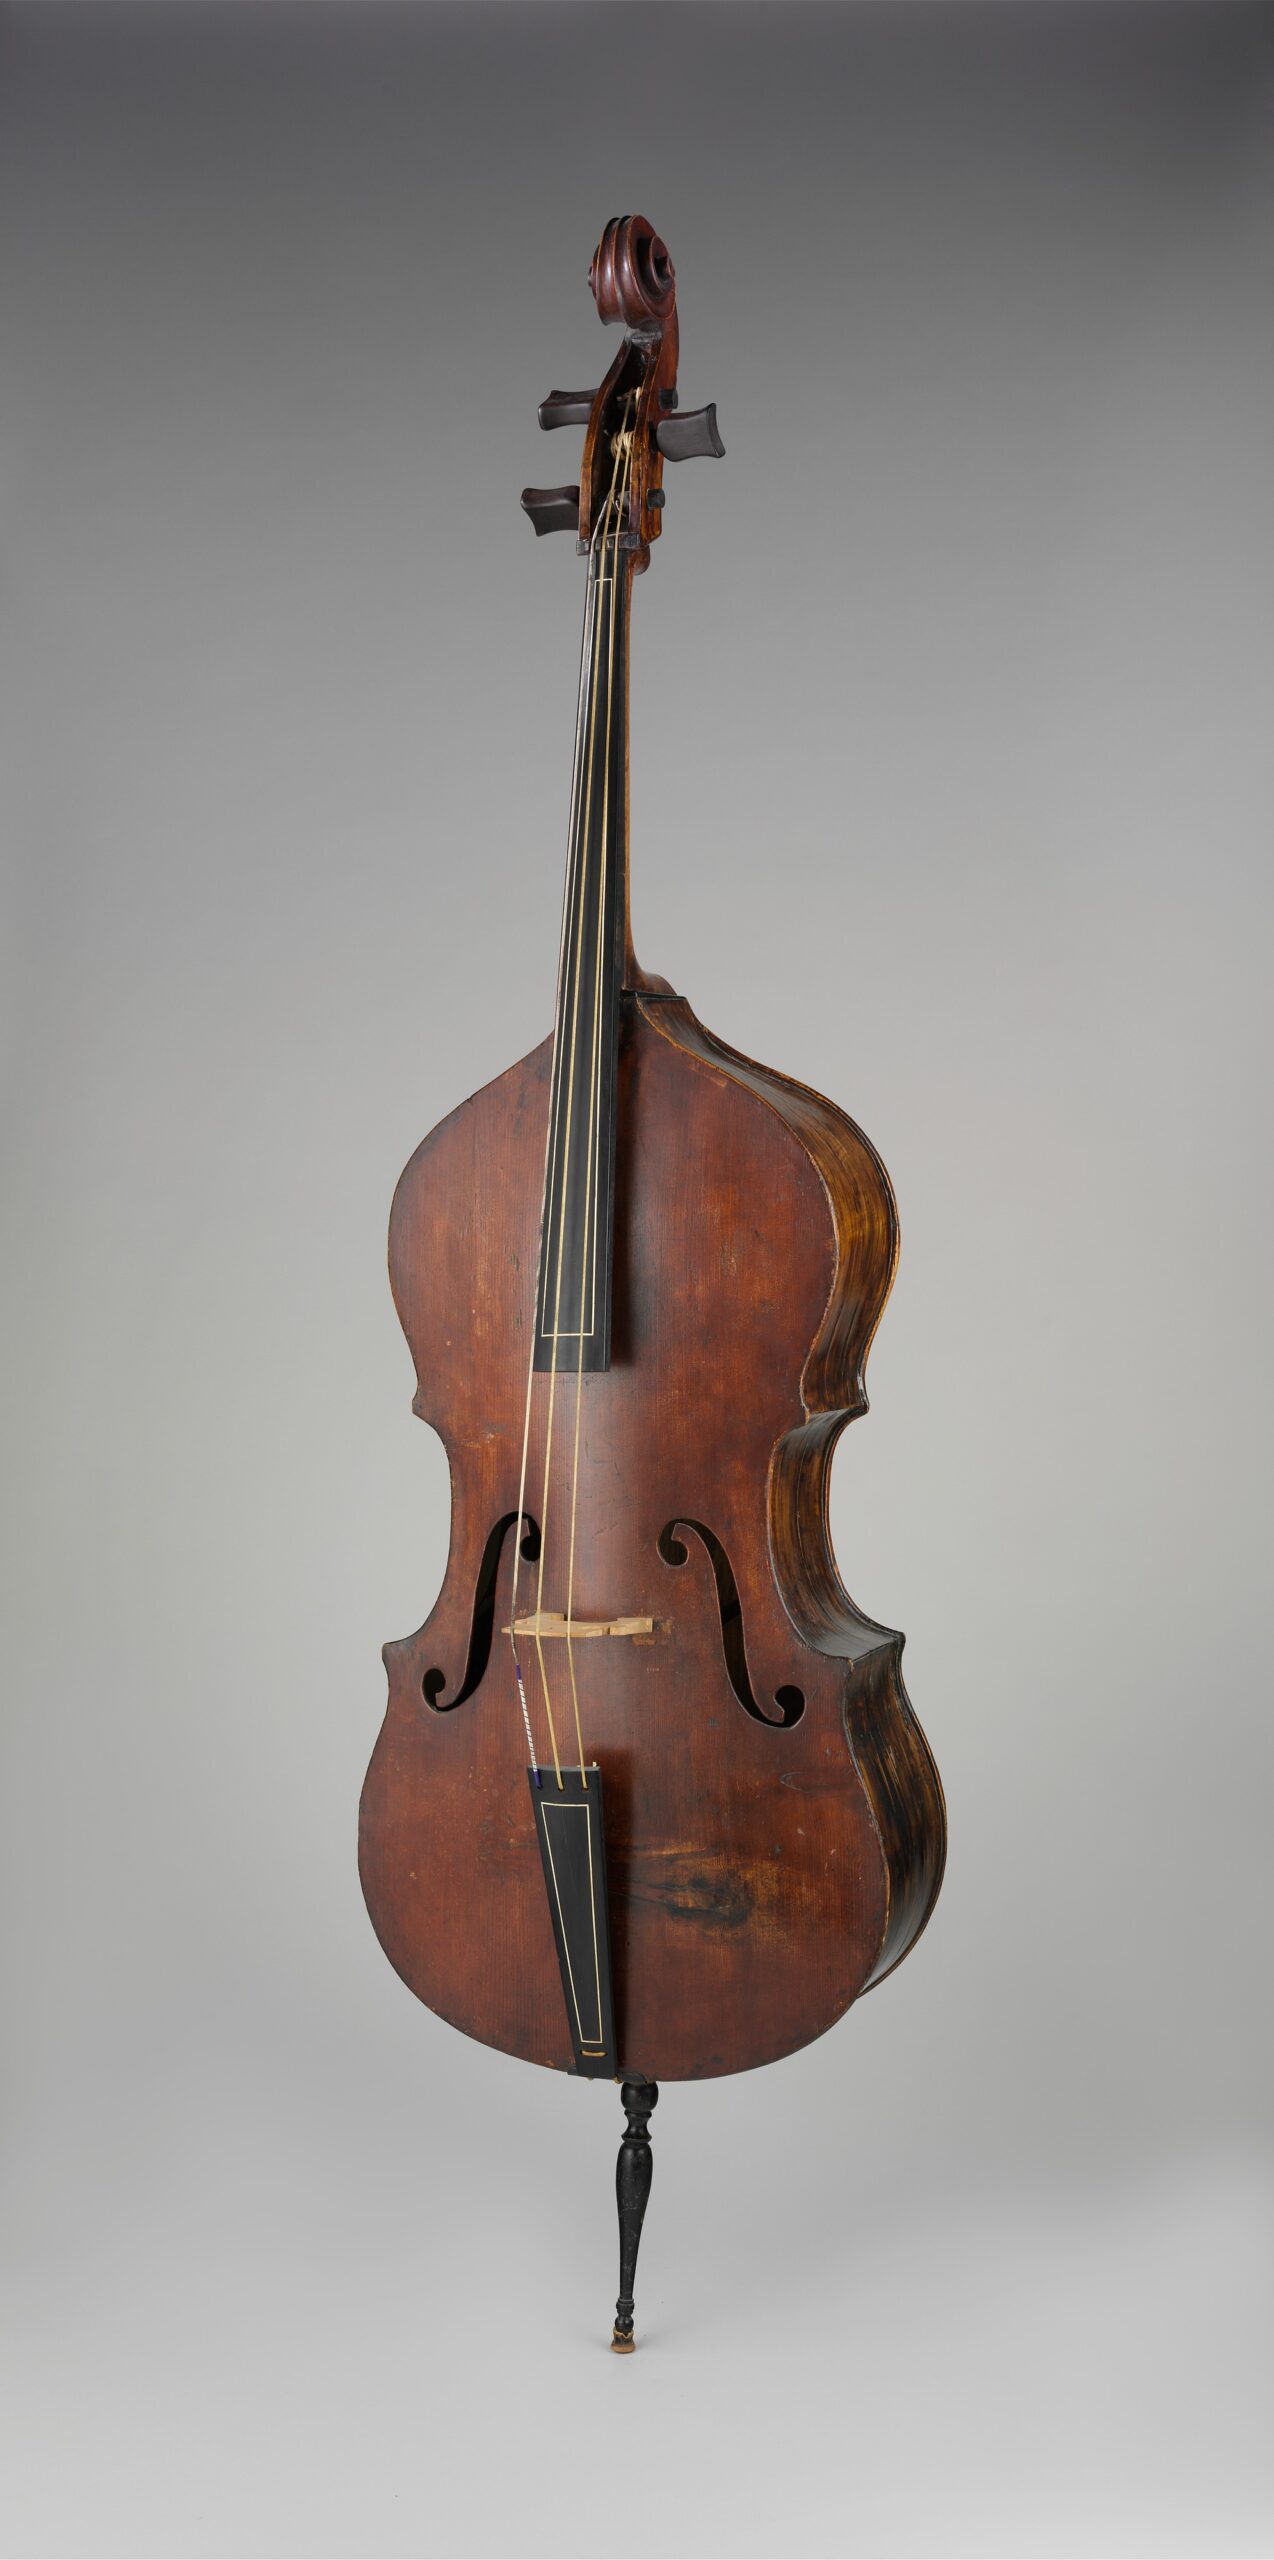 An Introduction to the Double String Bass and Its Magic